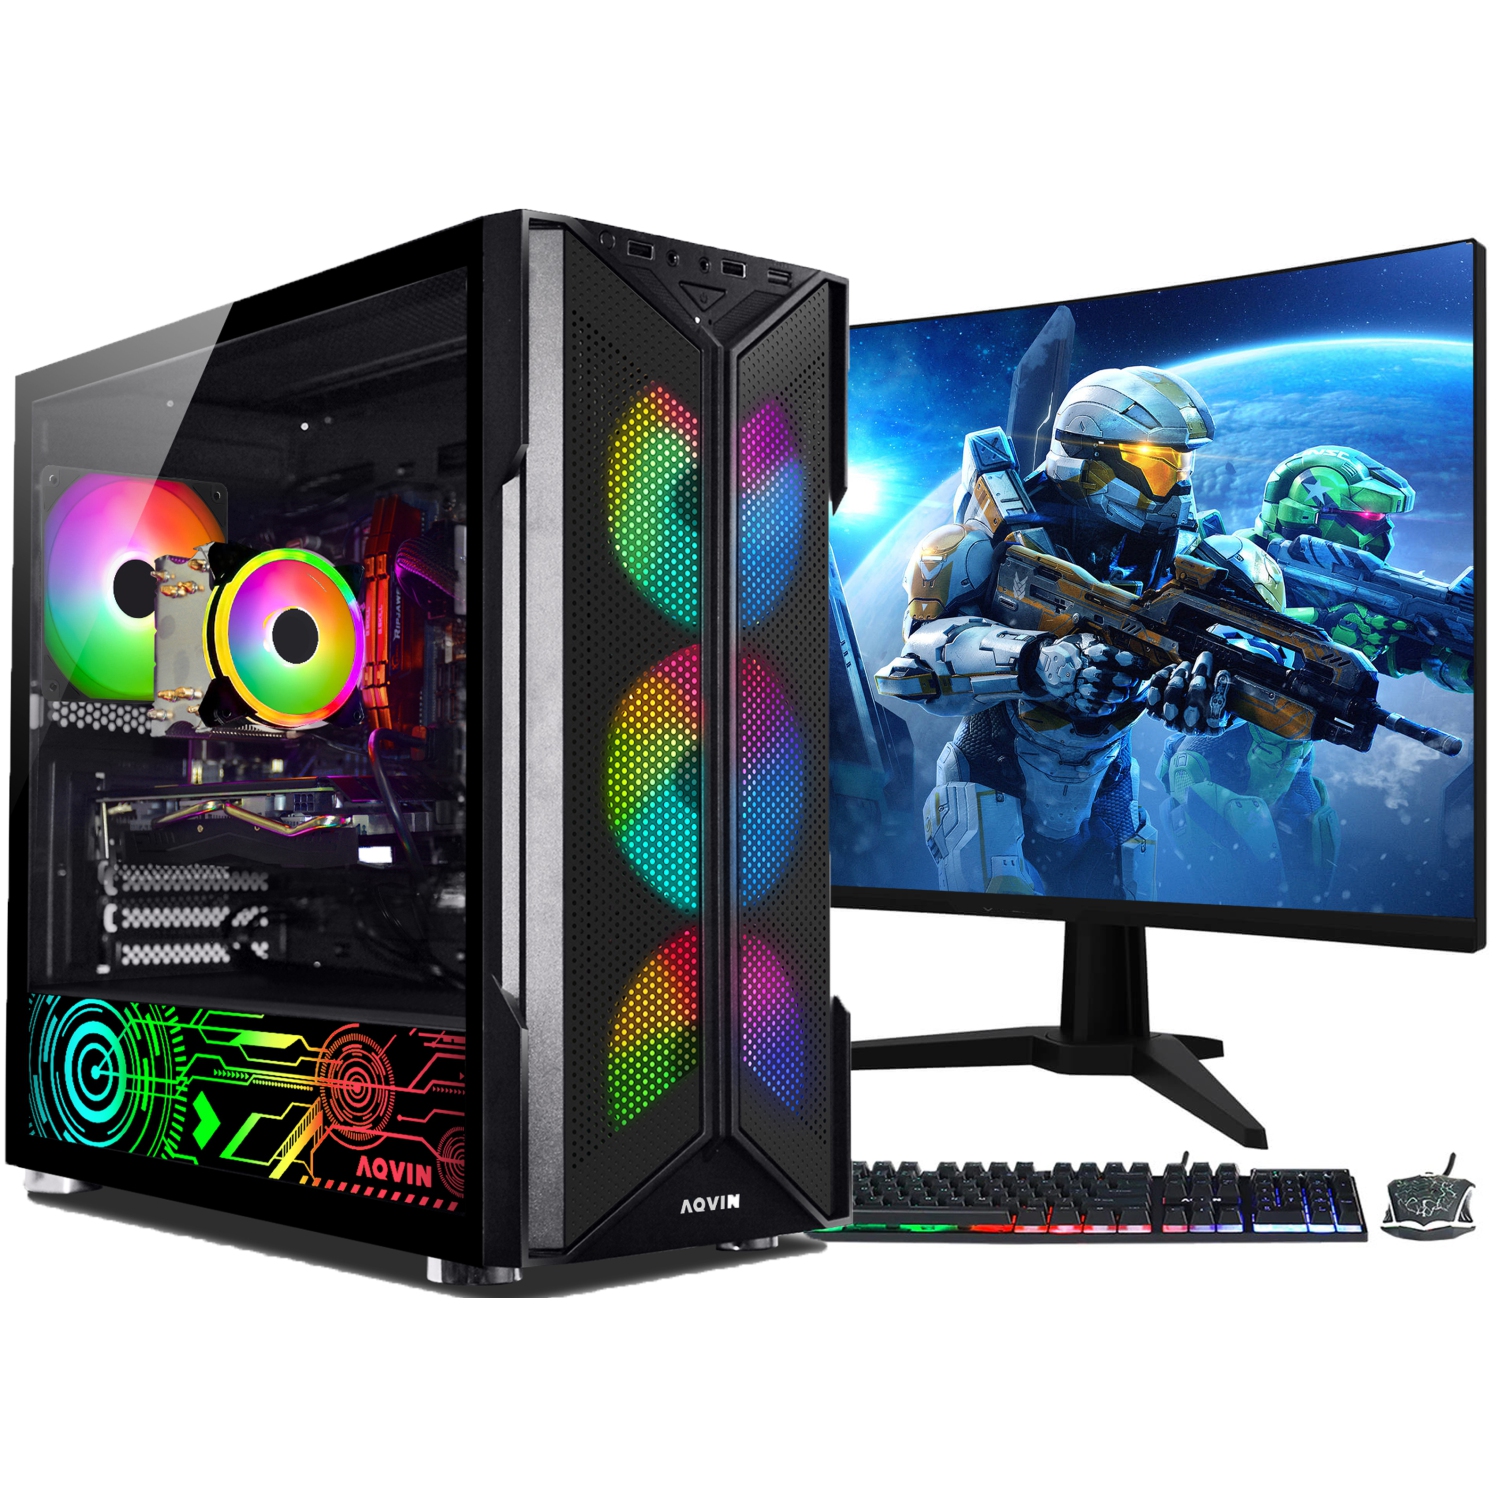 AQVIN-AQ20 Gaming PC Tower Desktop Computer - New 24 inch Curved Gaming Monitor (Intel Core i7 processor/ 32GB RAM/ 1TB SSD/ GeForce RTX 3050 8GB/ Windows 11) - Only at Best Buy